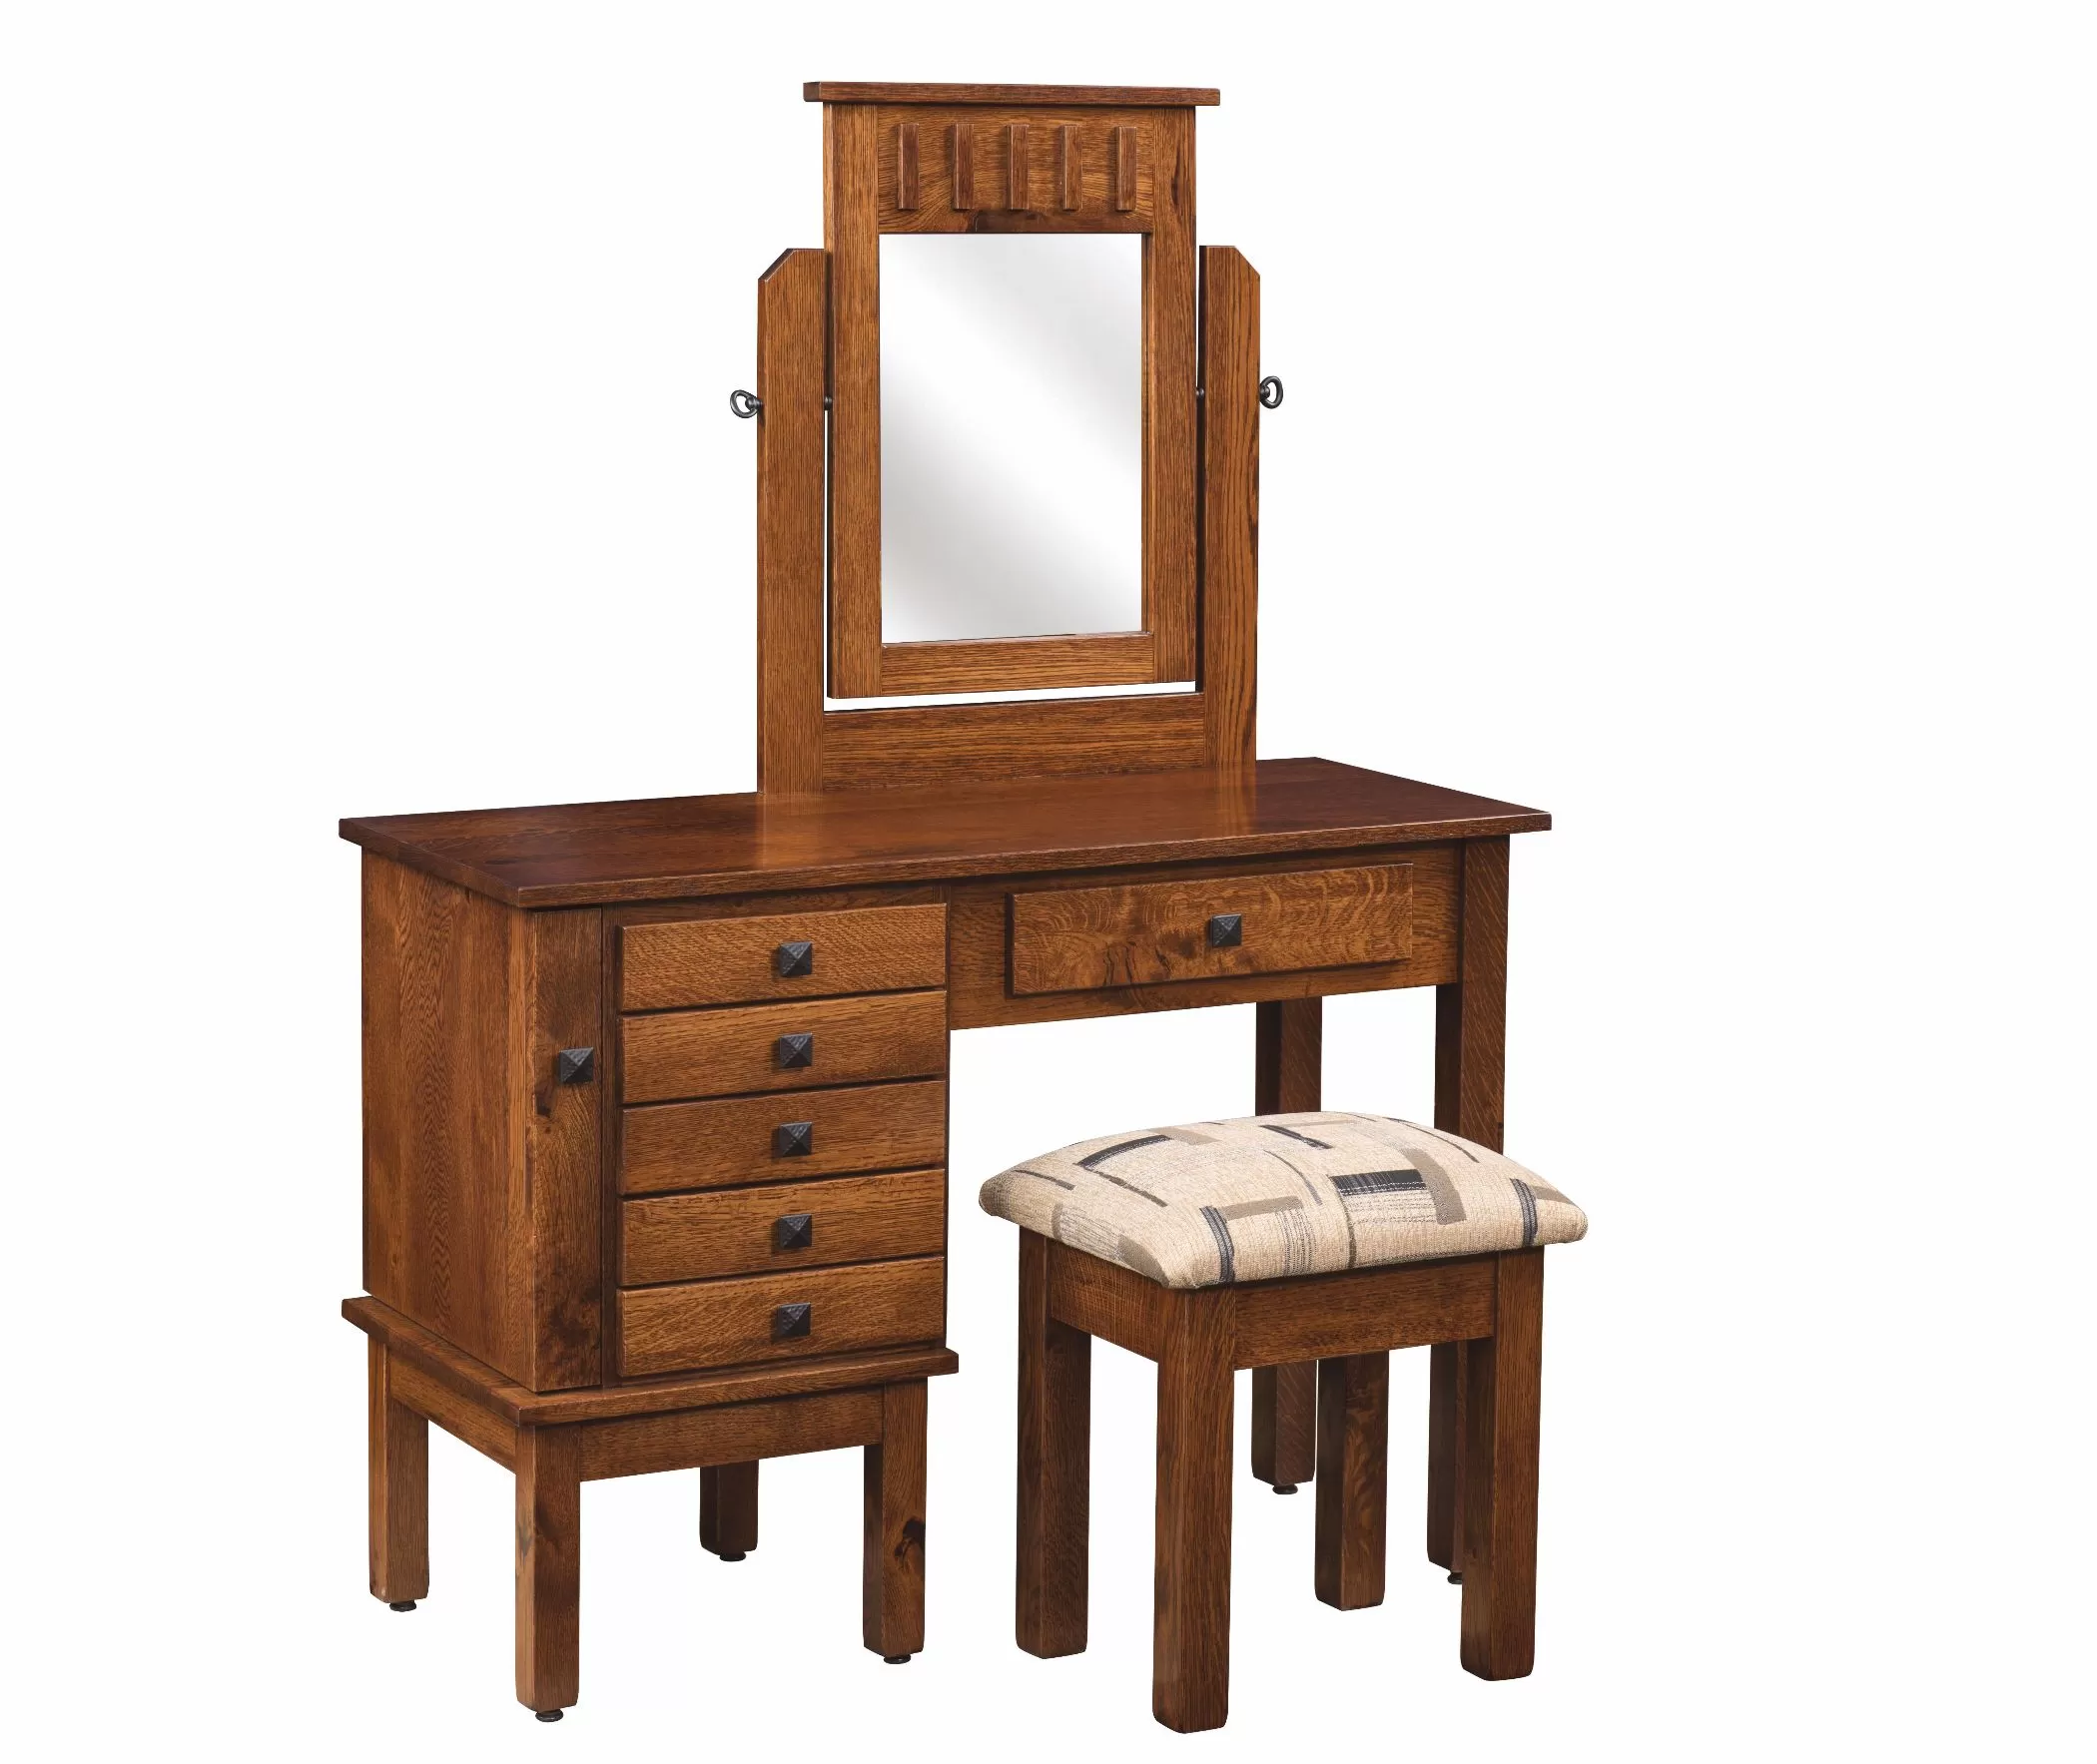 Dressing Tables & Jewelry Cabinets